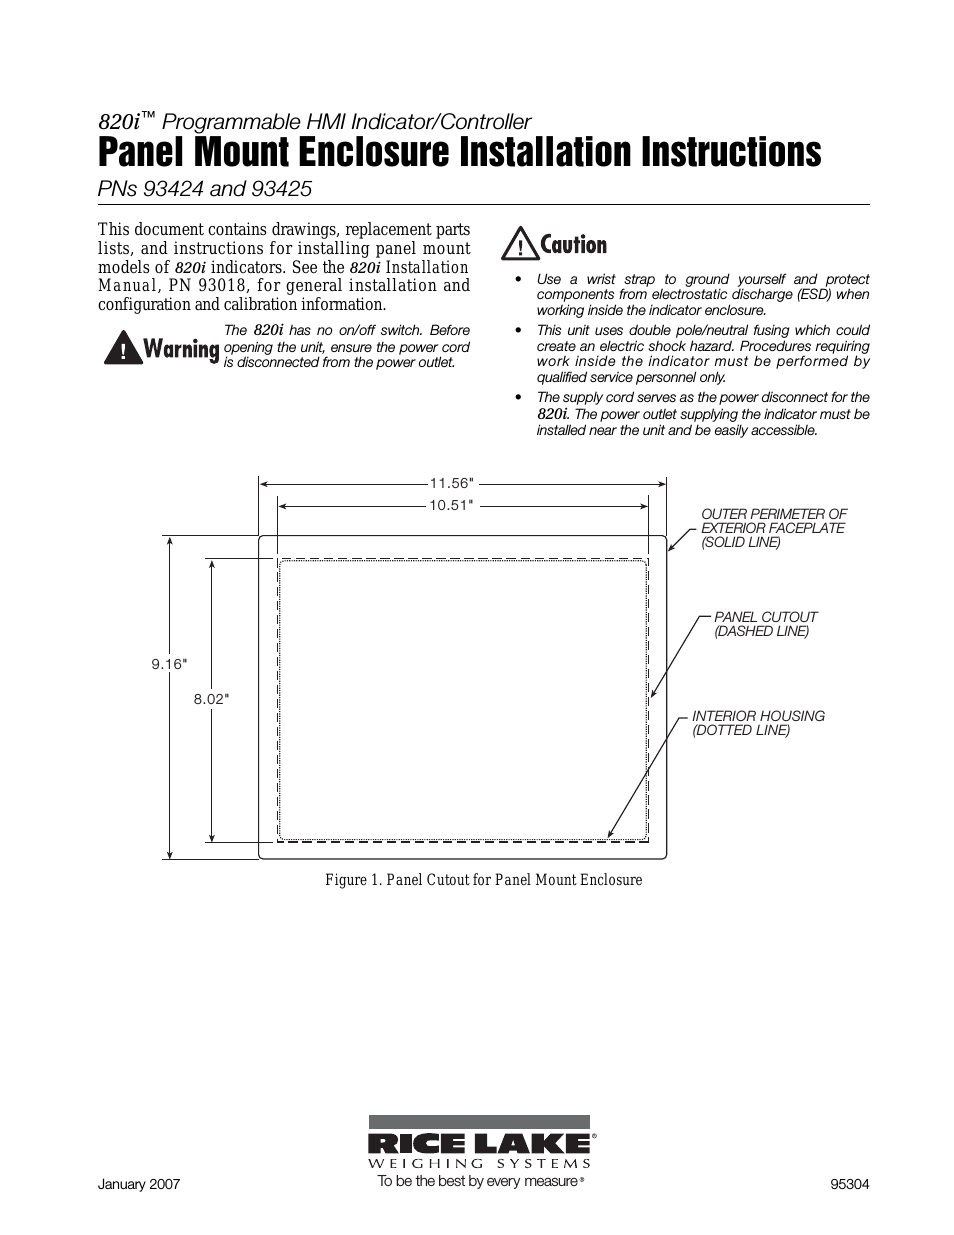 820i Programmable Indicator/Controller - Panel Mount Enclosure Installation Instructions